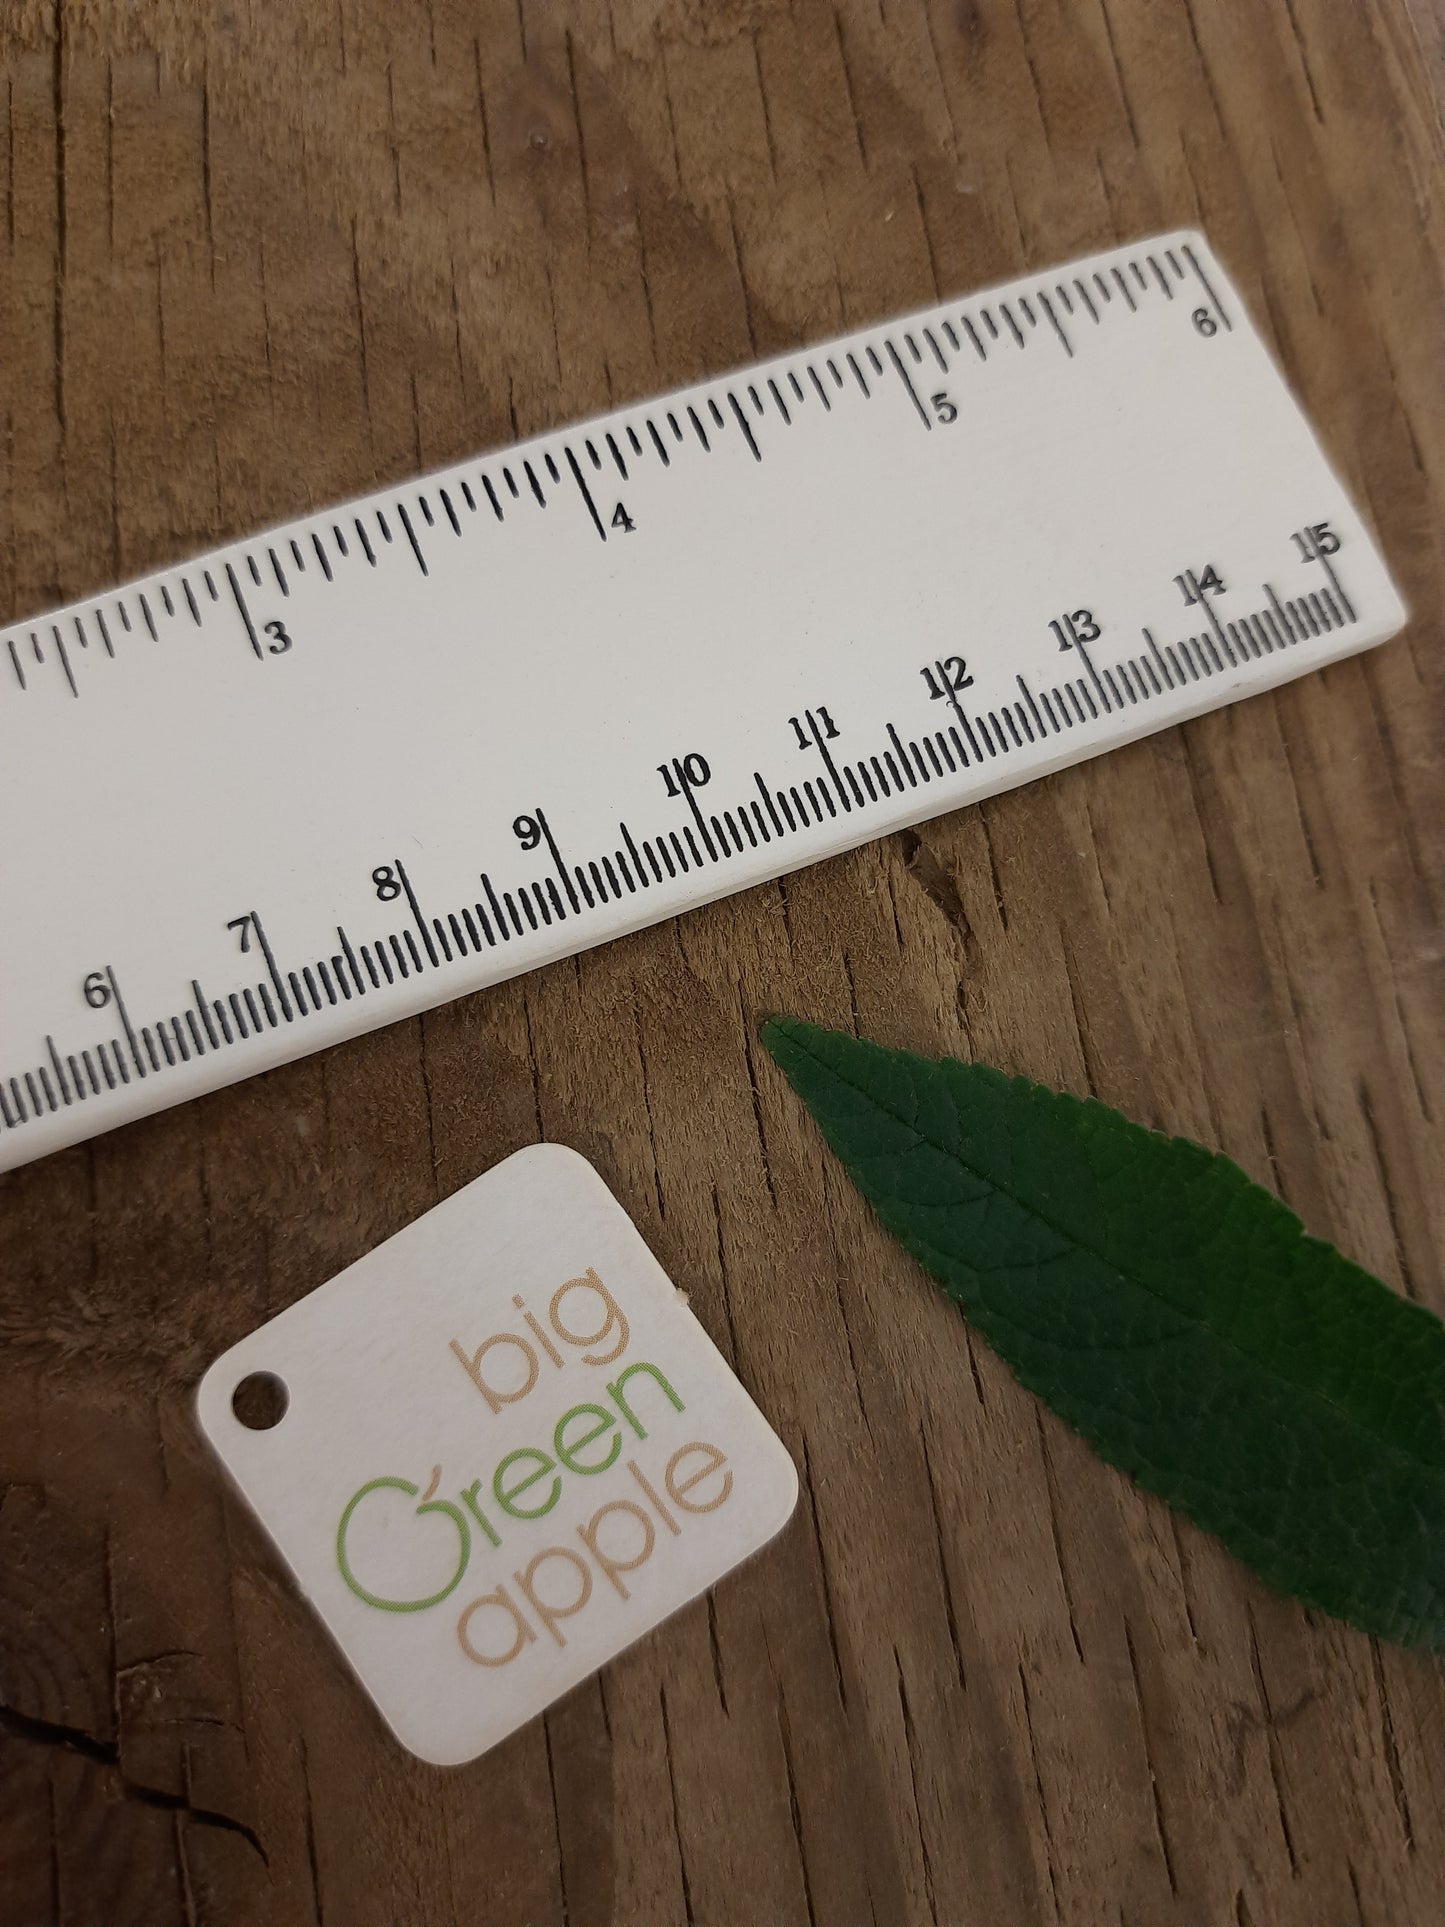 best eco friendly products uk, wooden fair trade cat ruler, ethical brands, green